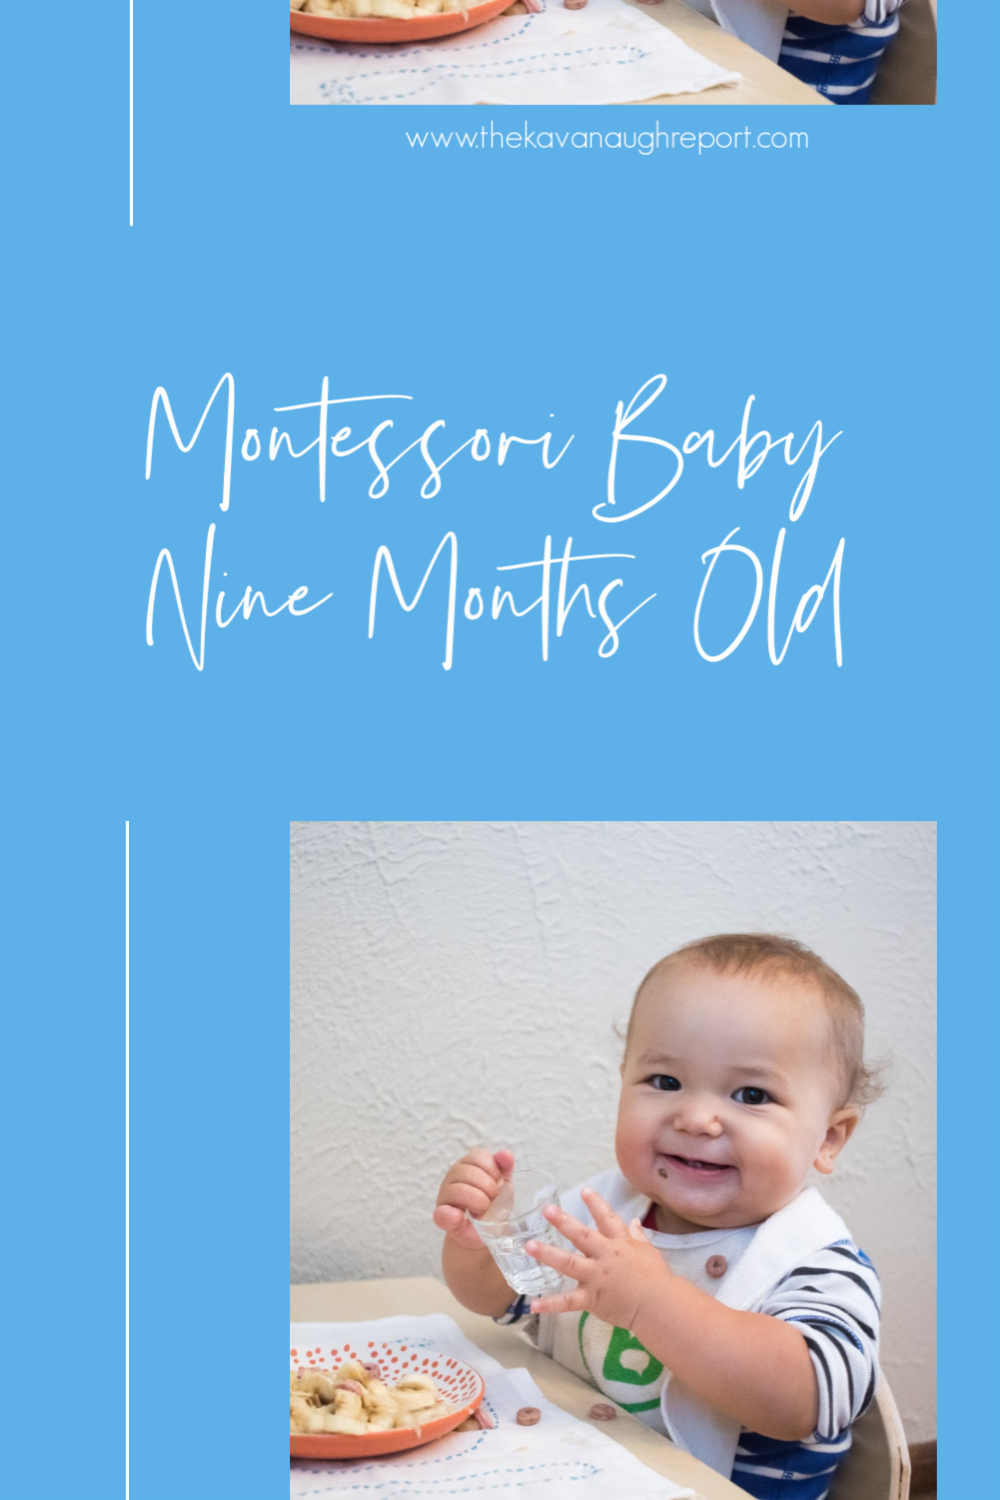 Using the Montessori method with your 9-month-old - articles and tips for using Montessori with your baby